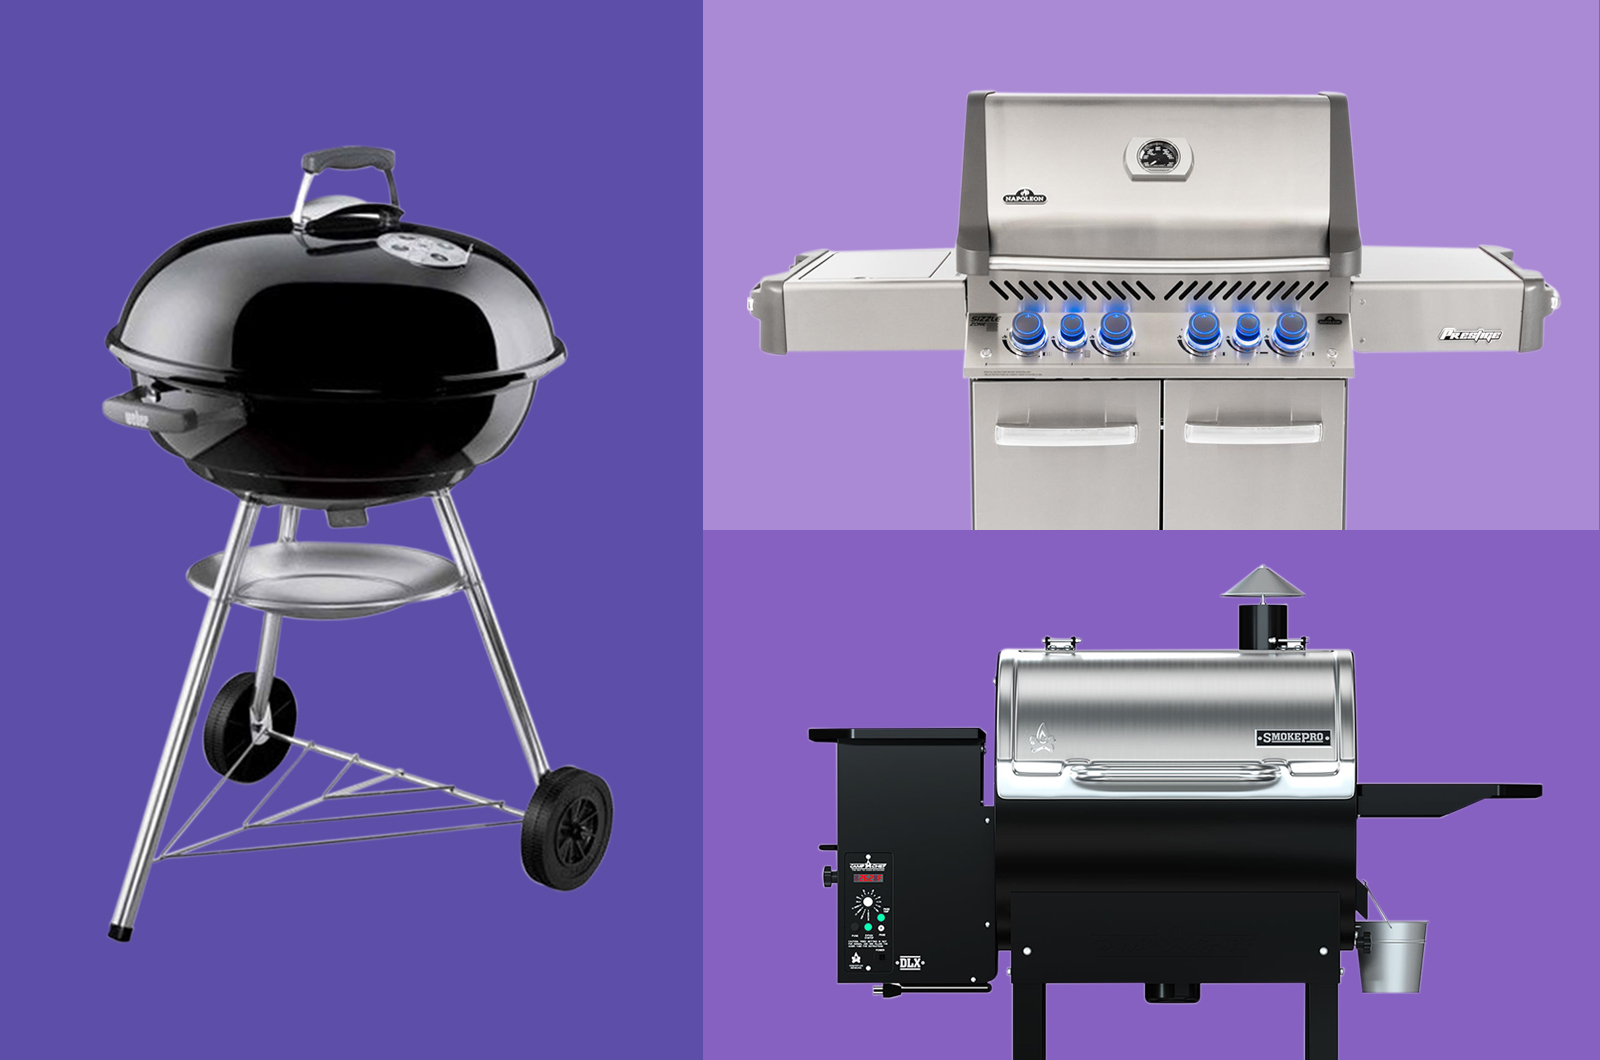 The Best Grills and Smokers for Your Money, According to BBQ Pros